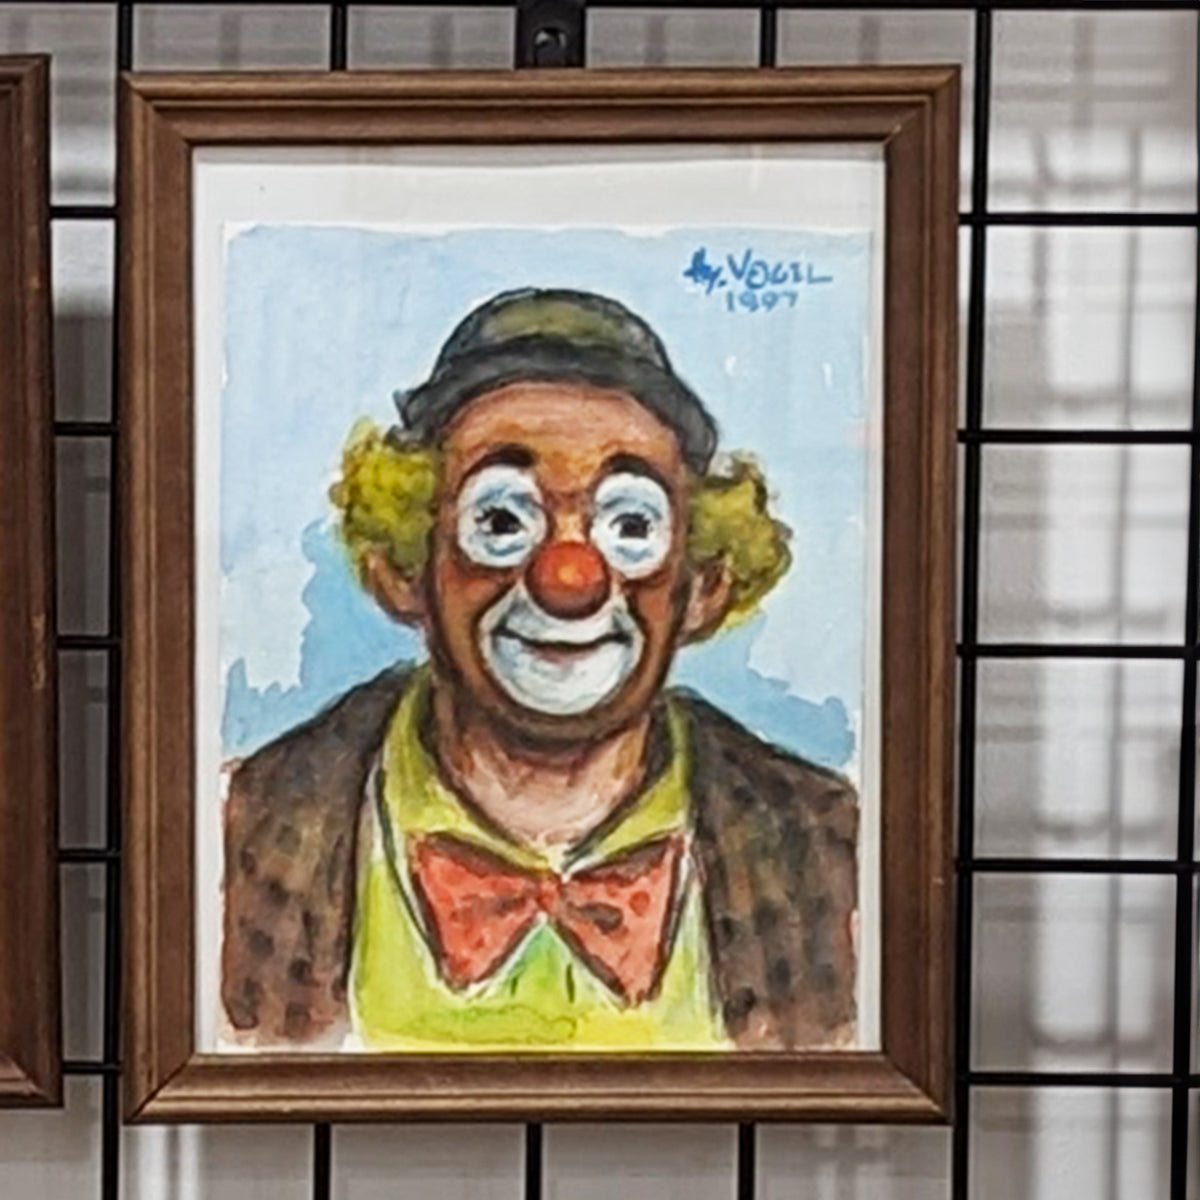 PAIR Colorful Clown Watercolor Paintings Signed by Hy Vogel (Sold Separately) - Habroc - Online ReStore